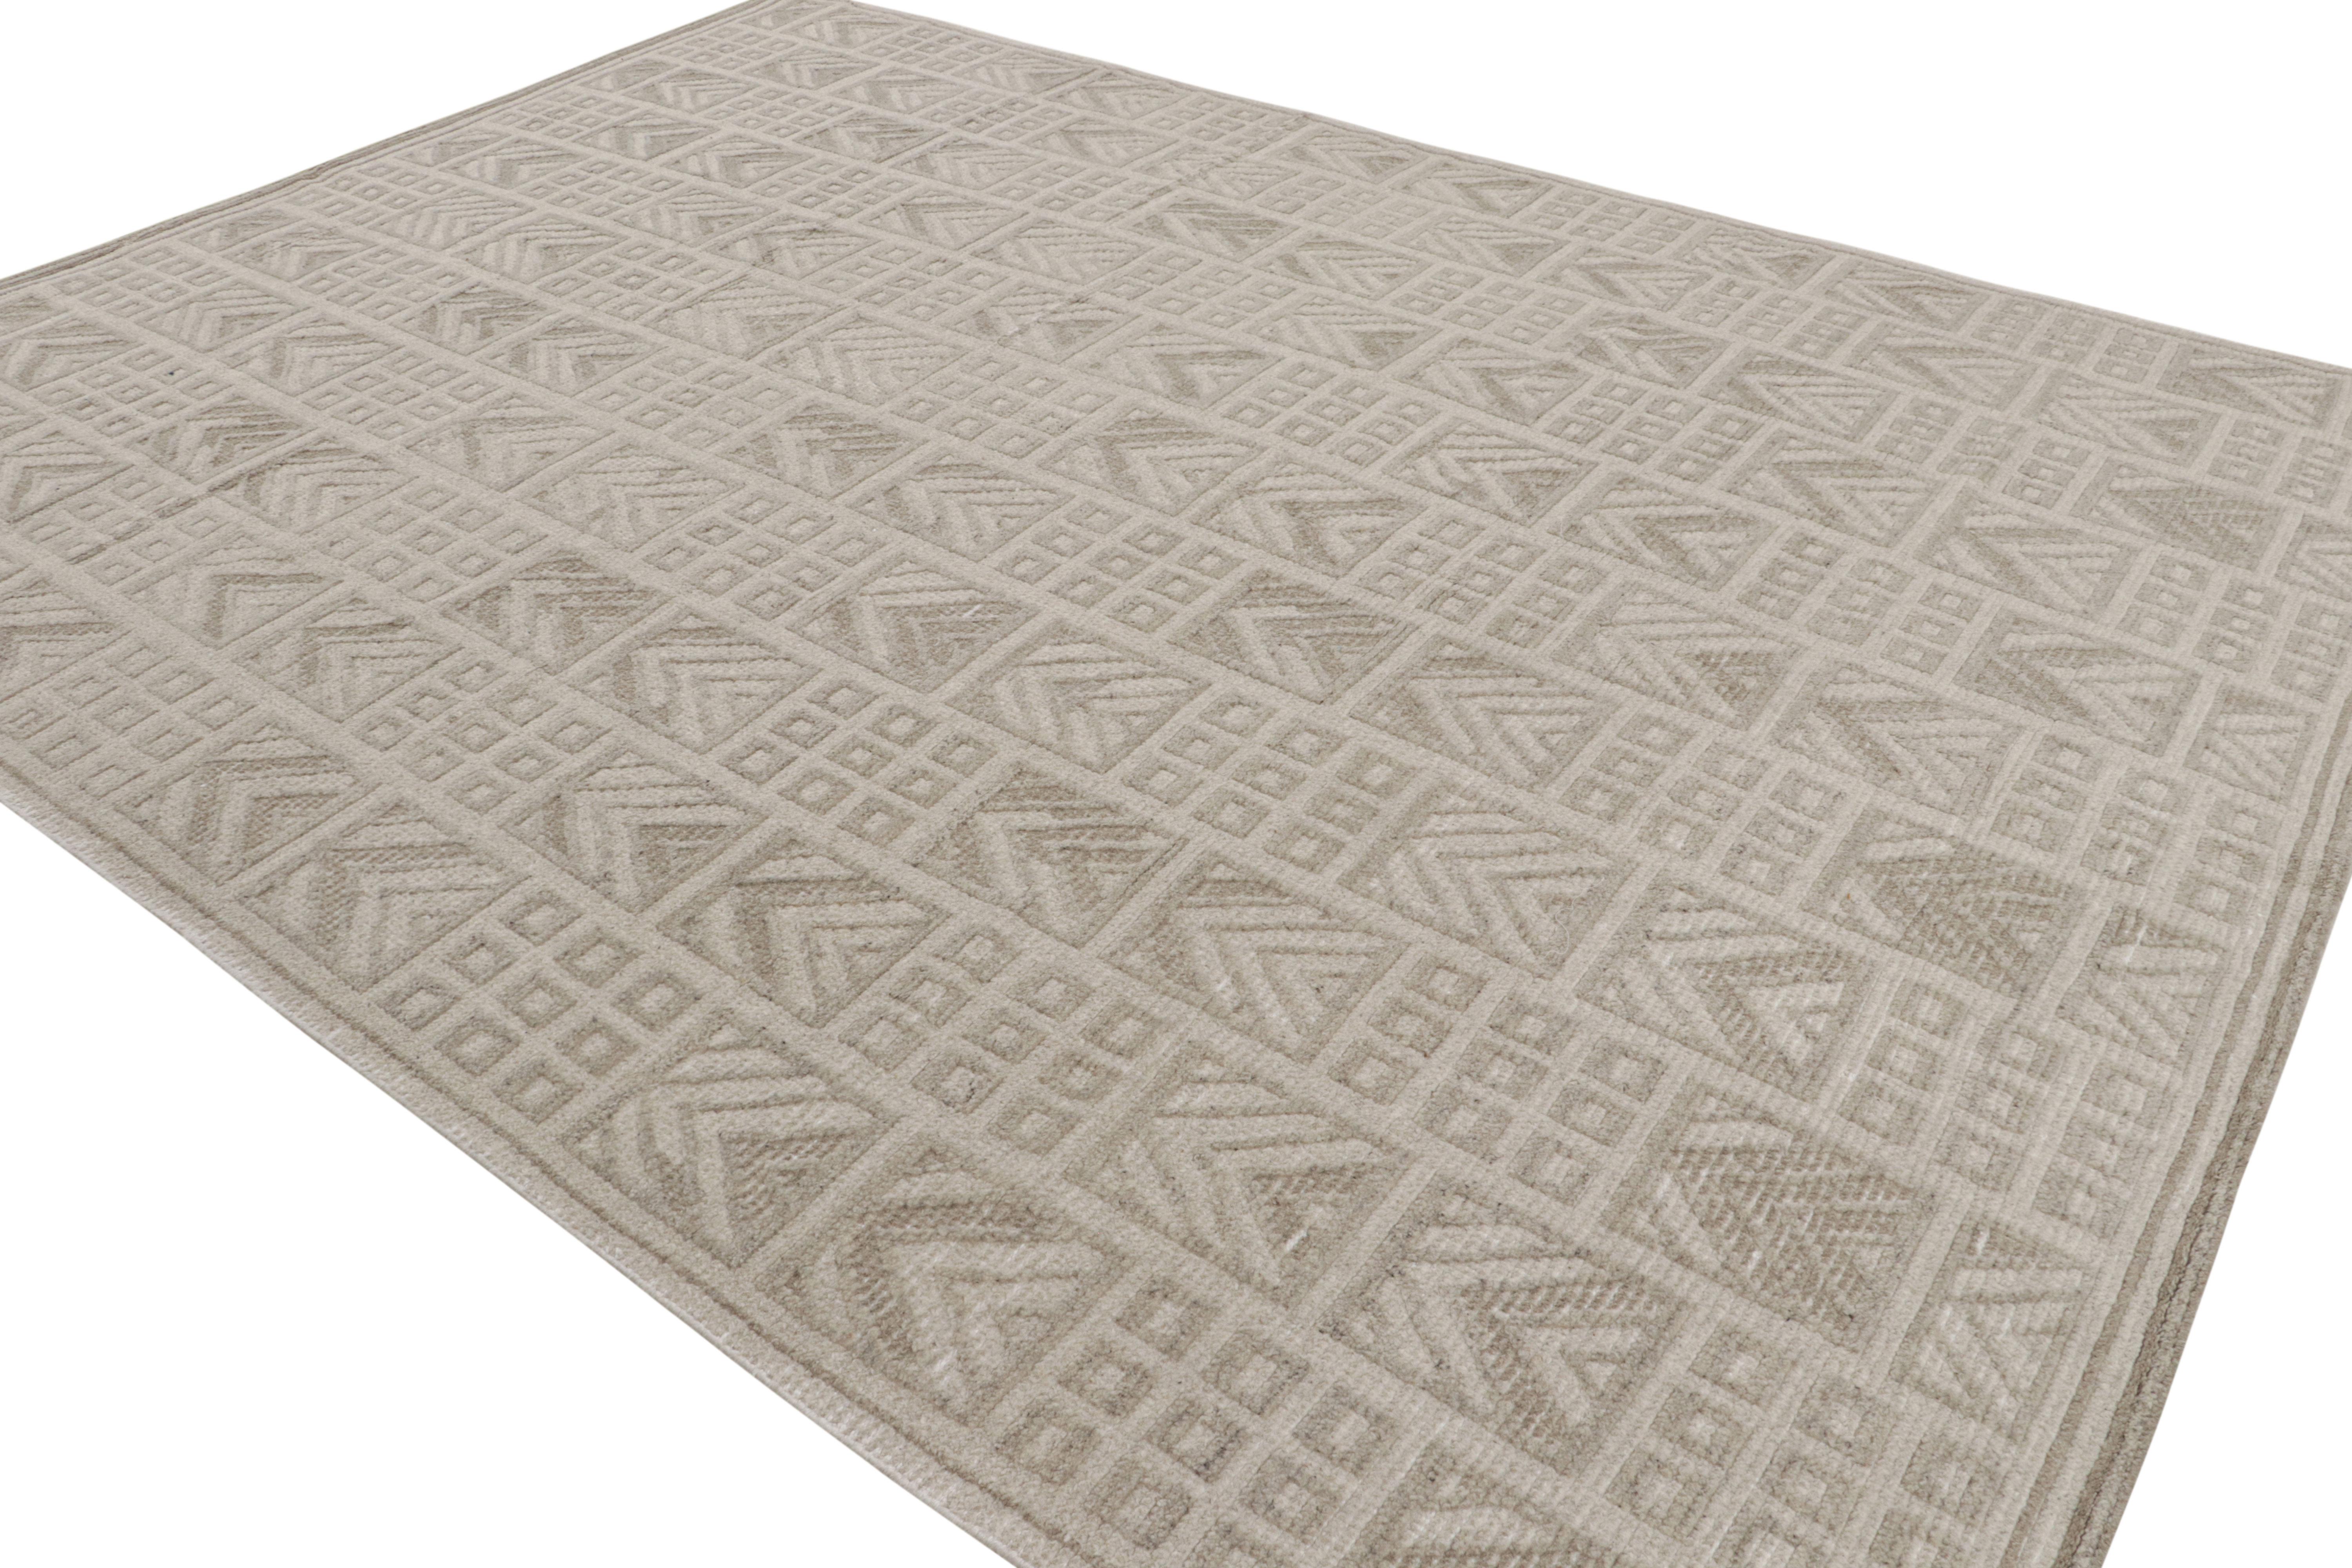 A new addition to Rug & Kilim’s Scandinavian Collection, this hand-knotted wool 9x12 rug reflects a contemporary take on mid-century Rollakans and Swedish Deco style.

On the Design:

Our use of undyed natural yarns lends a subtle striae with more